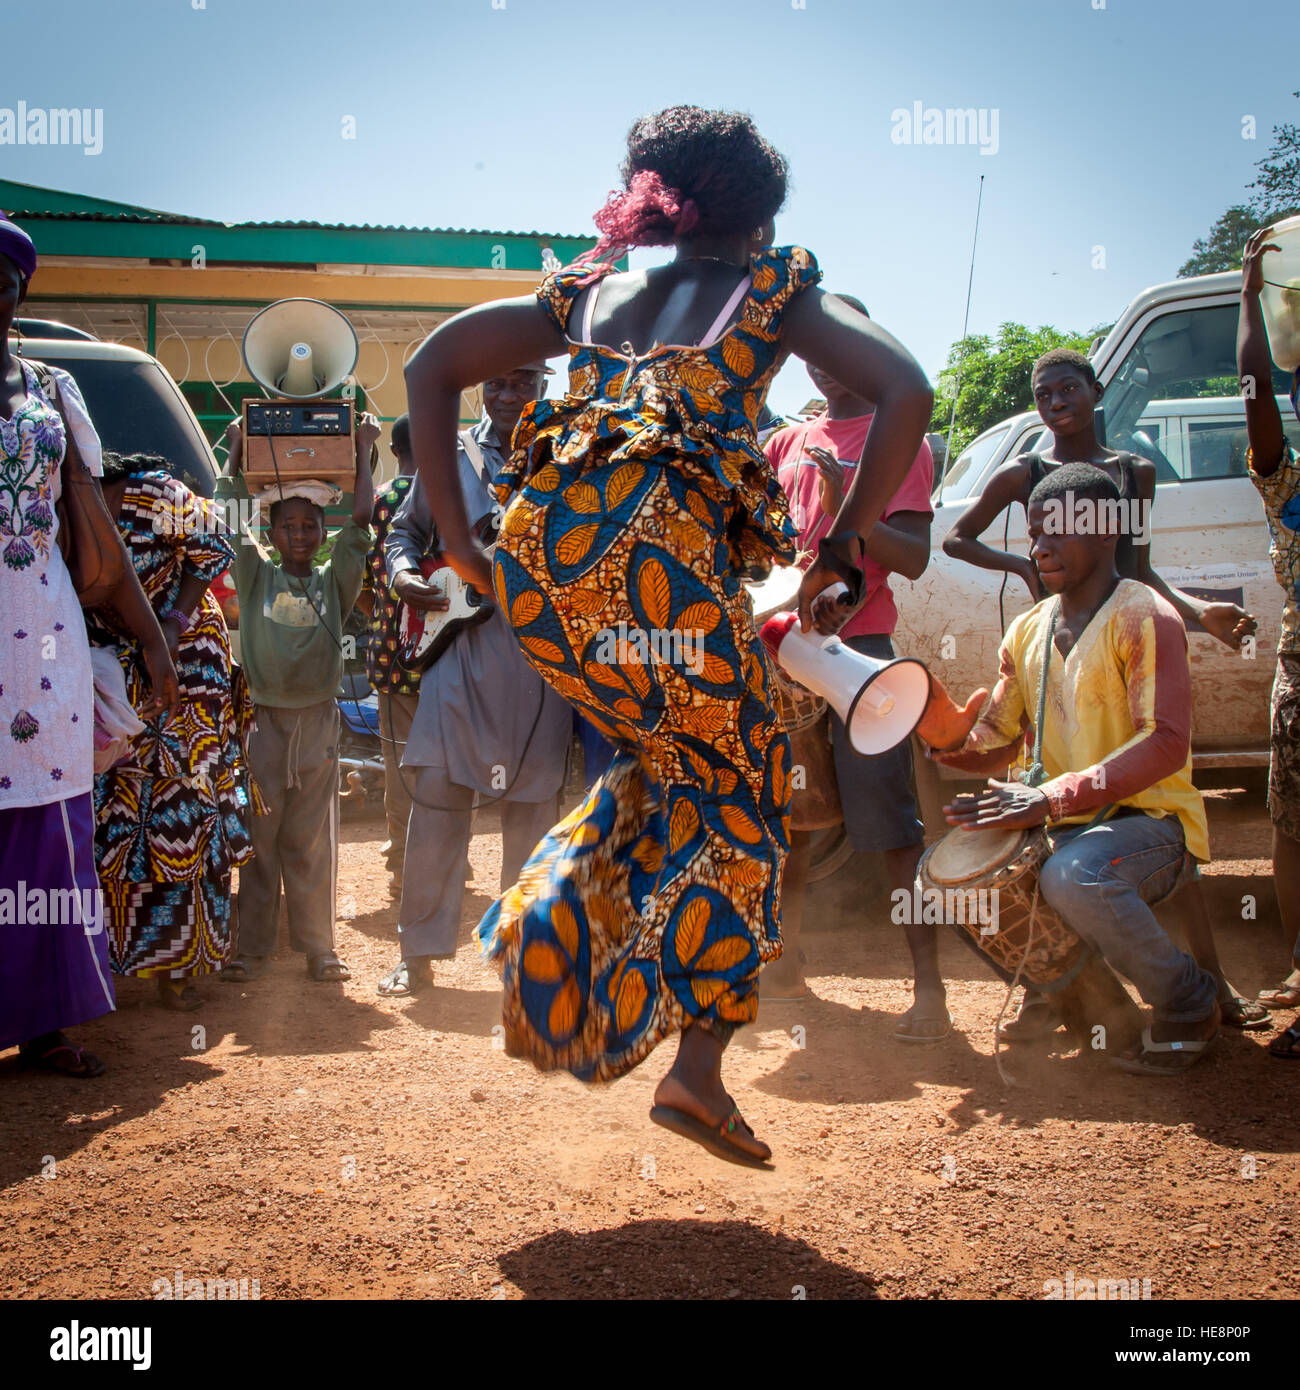 African dancer with musicians in Kabala, Sierra Leone Stock Photo